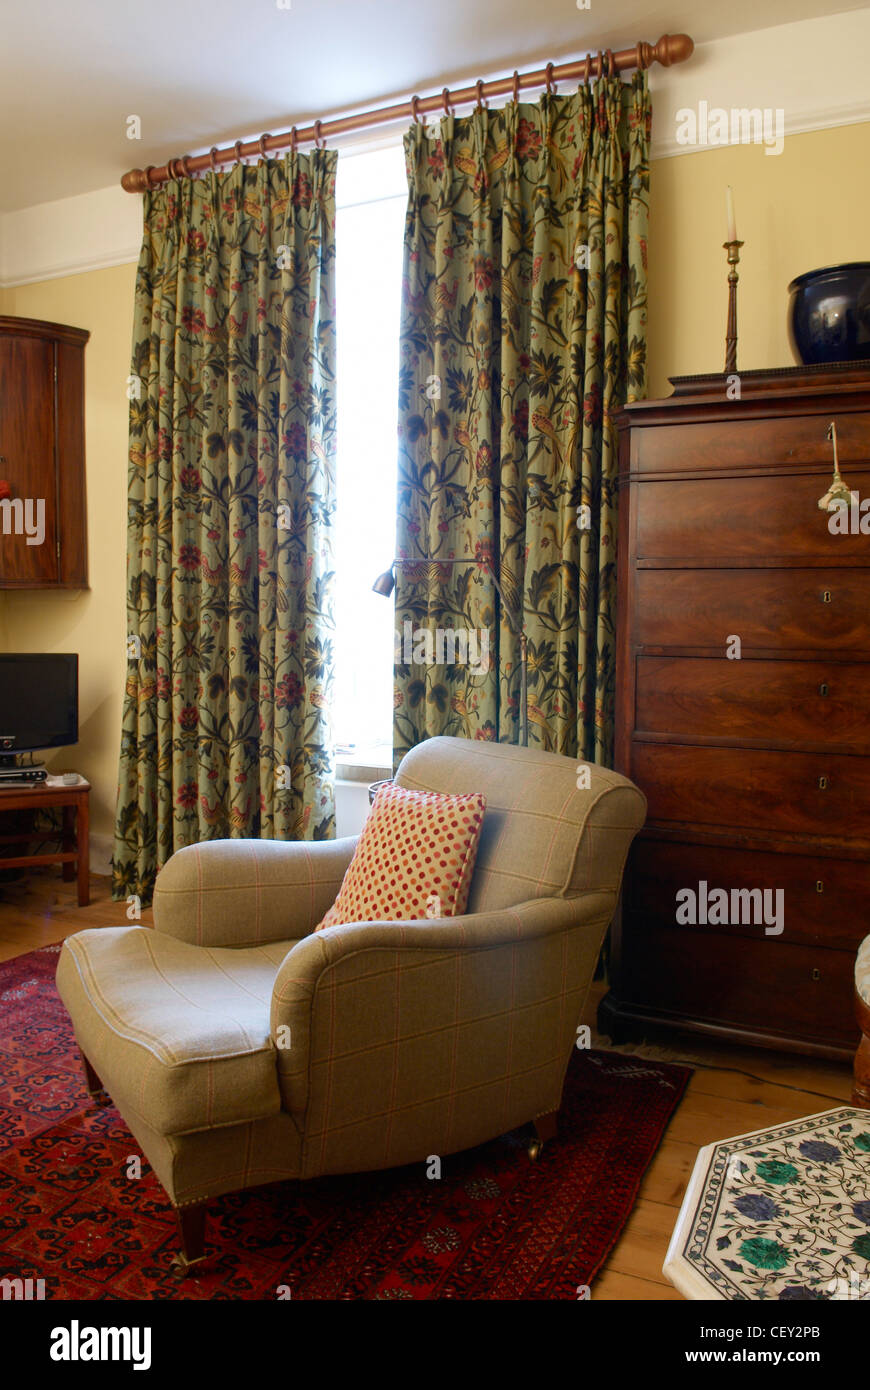 Patterned curtains Stock Photo